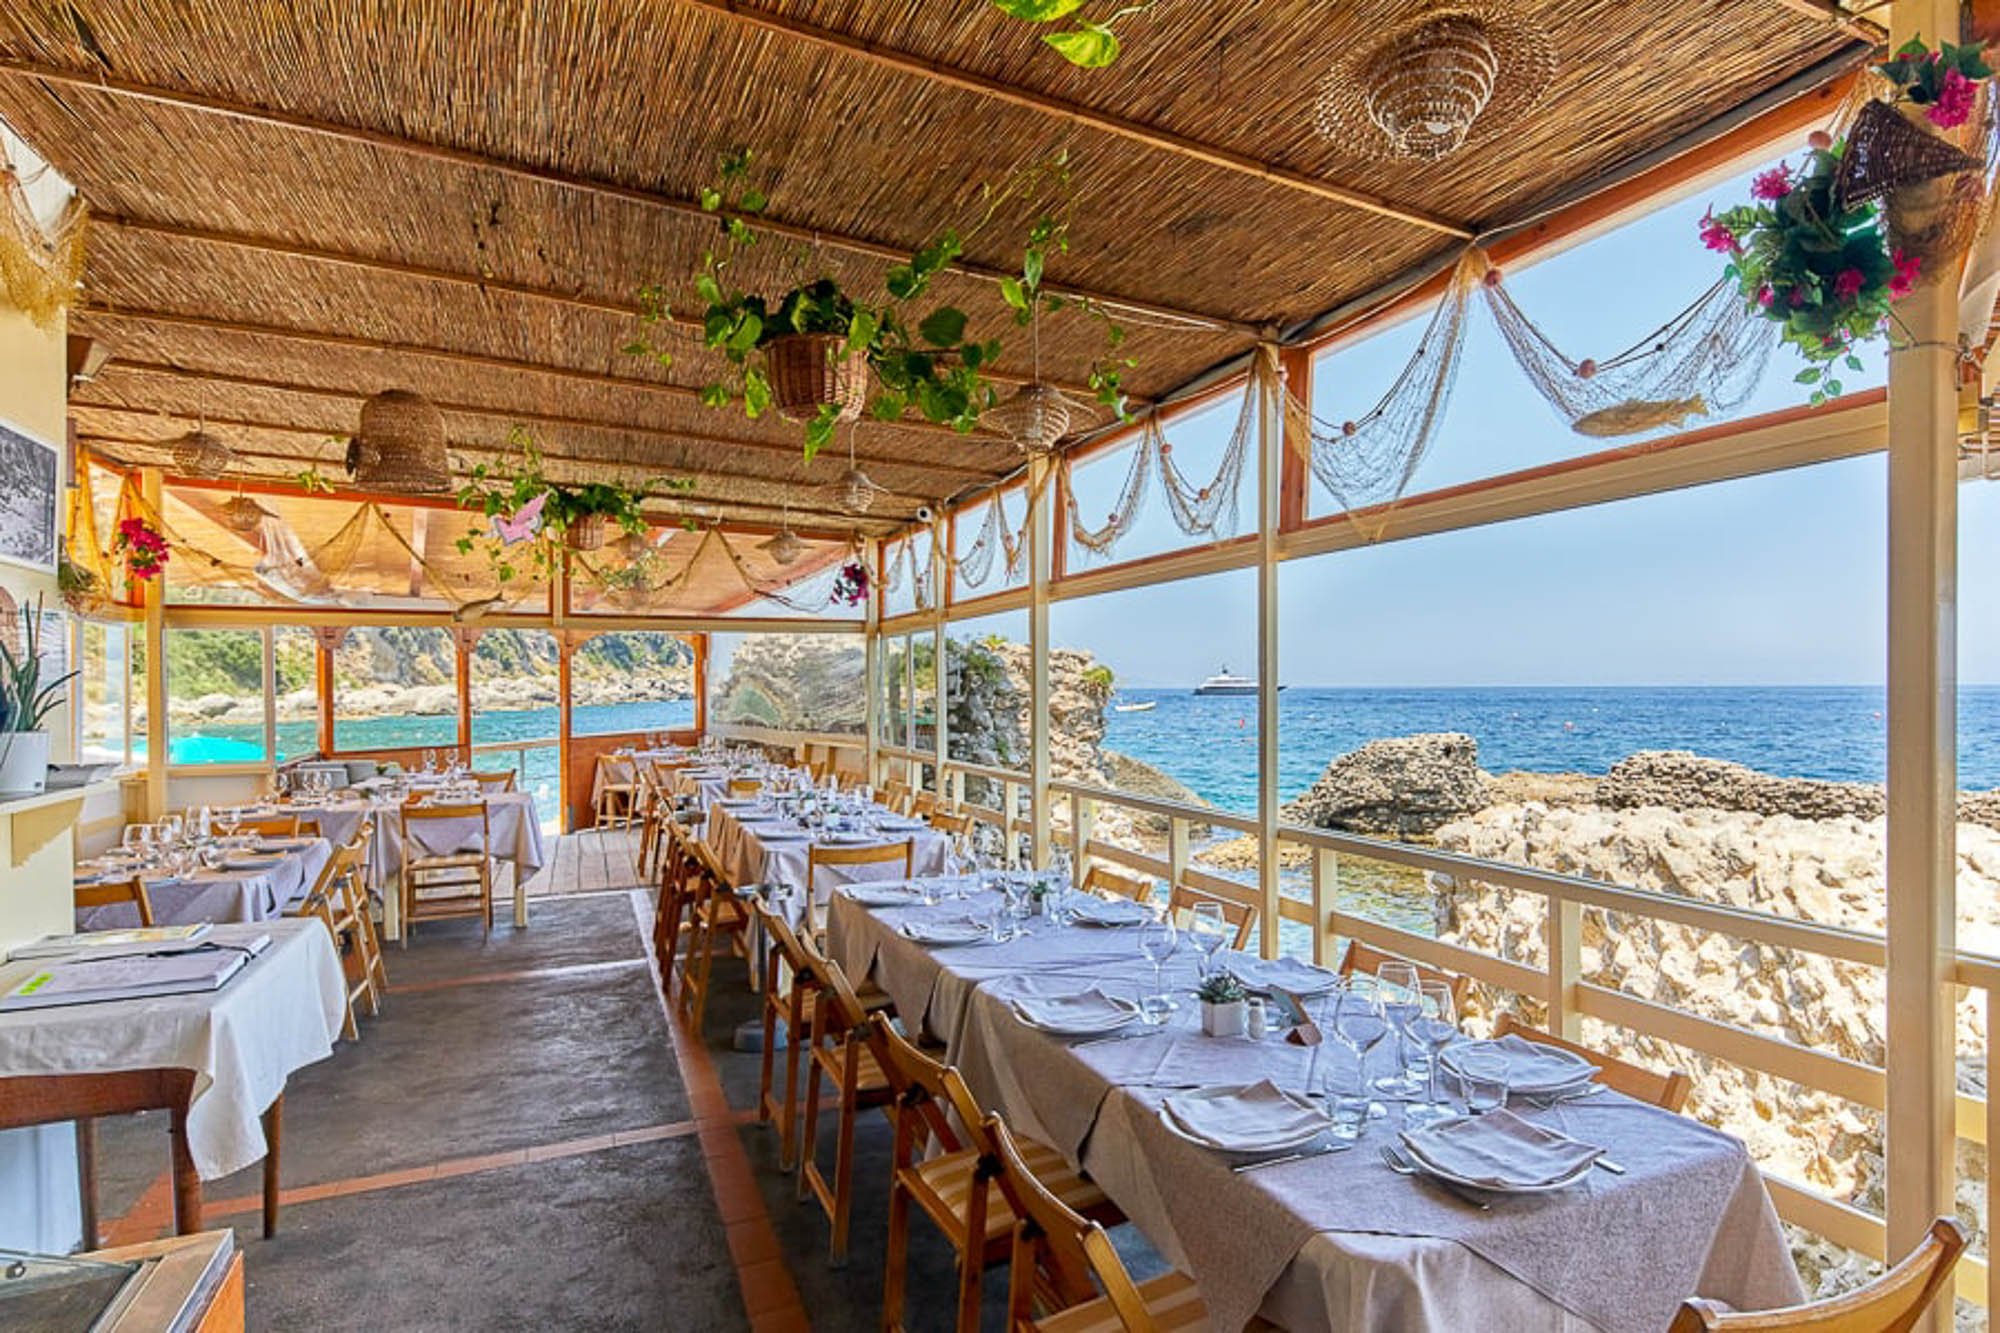 Attached is Restaurant Bagni Tiberio, a casual seaside venue open daily for lunch. If you’re in the mood for something small, there’s also a separate snack bar.